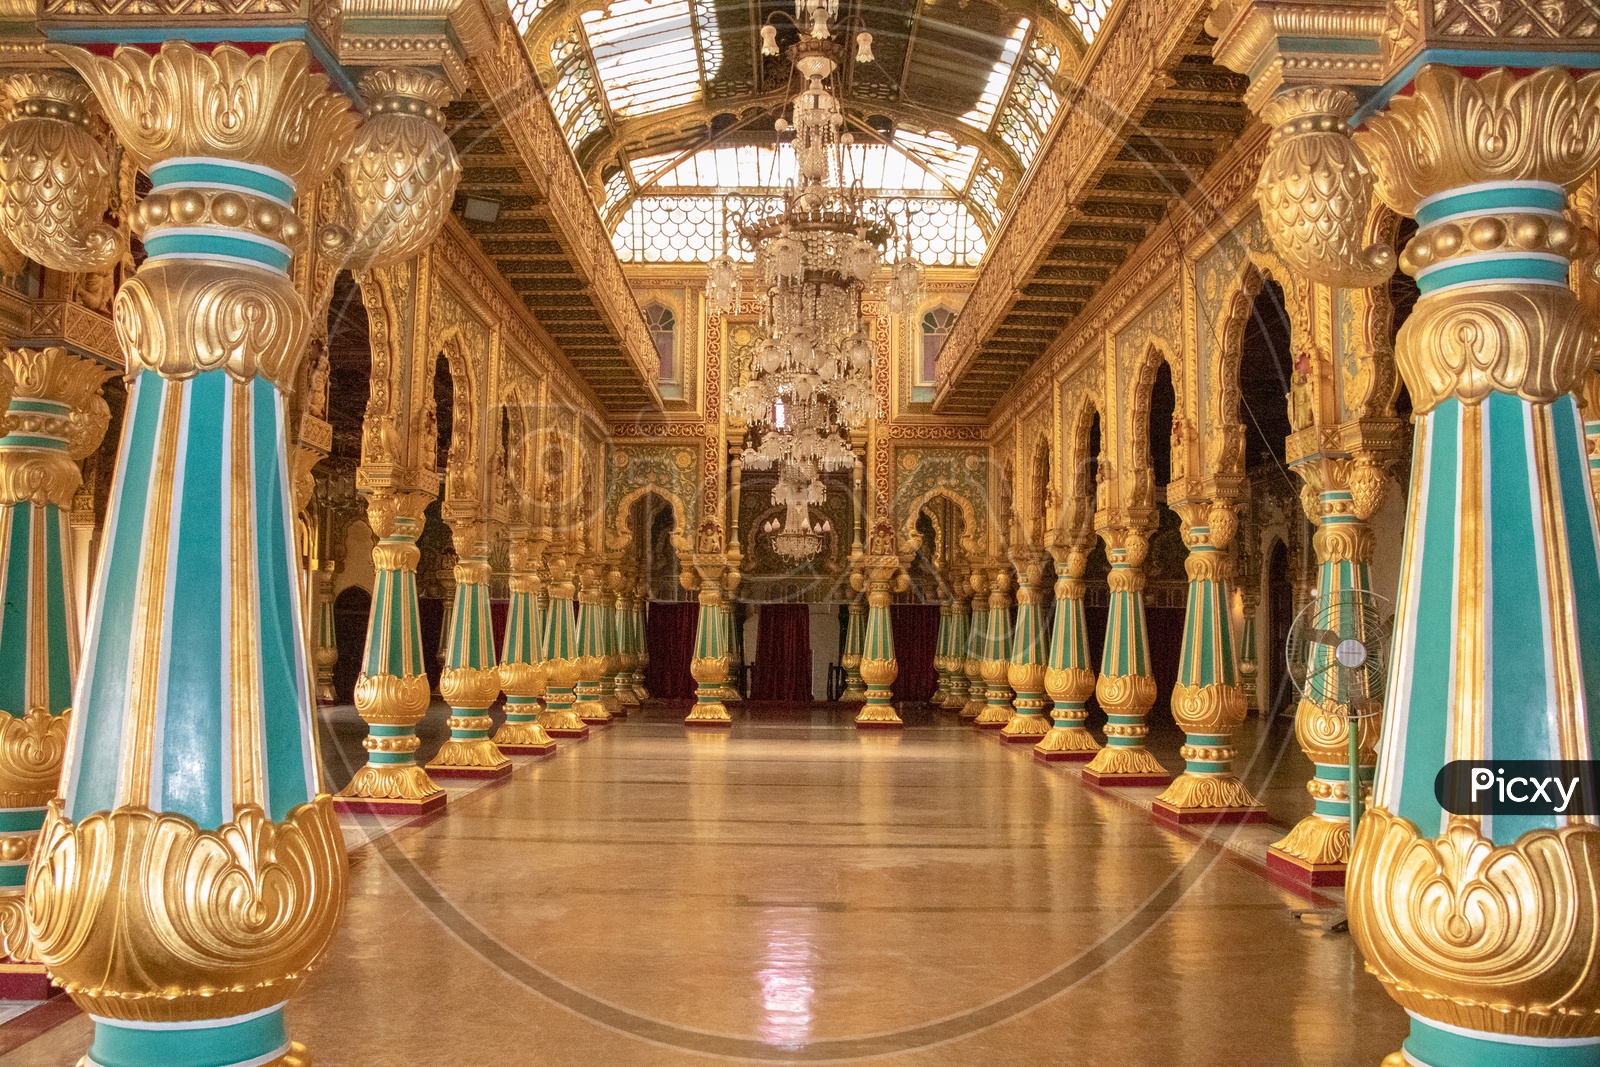 Architecture of Mysore Palace With Pillars And Darbar Halls